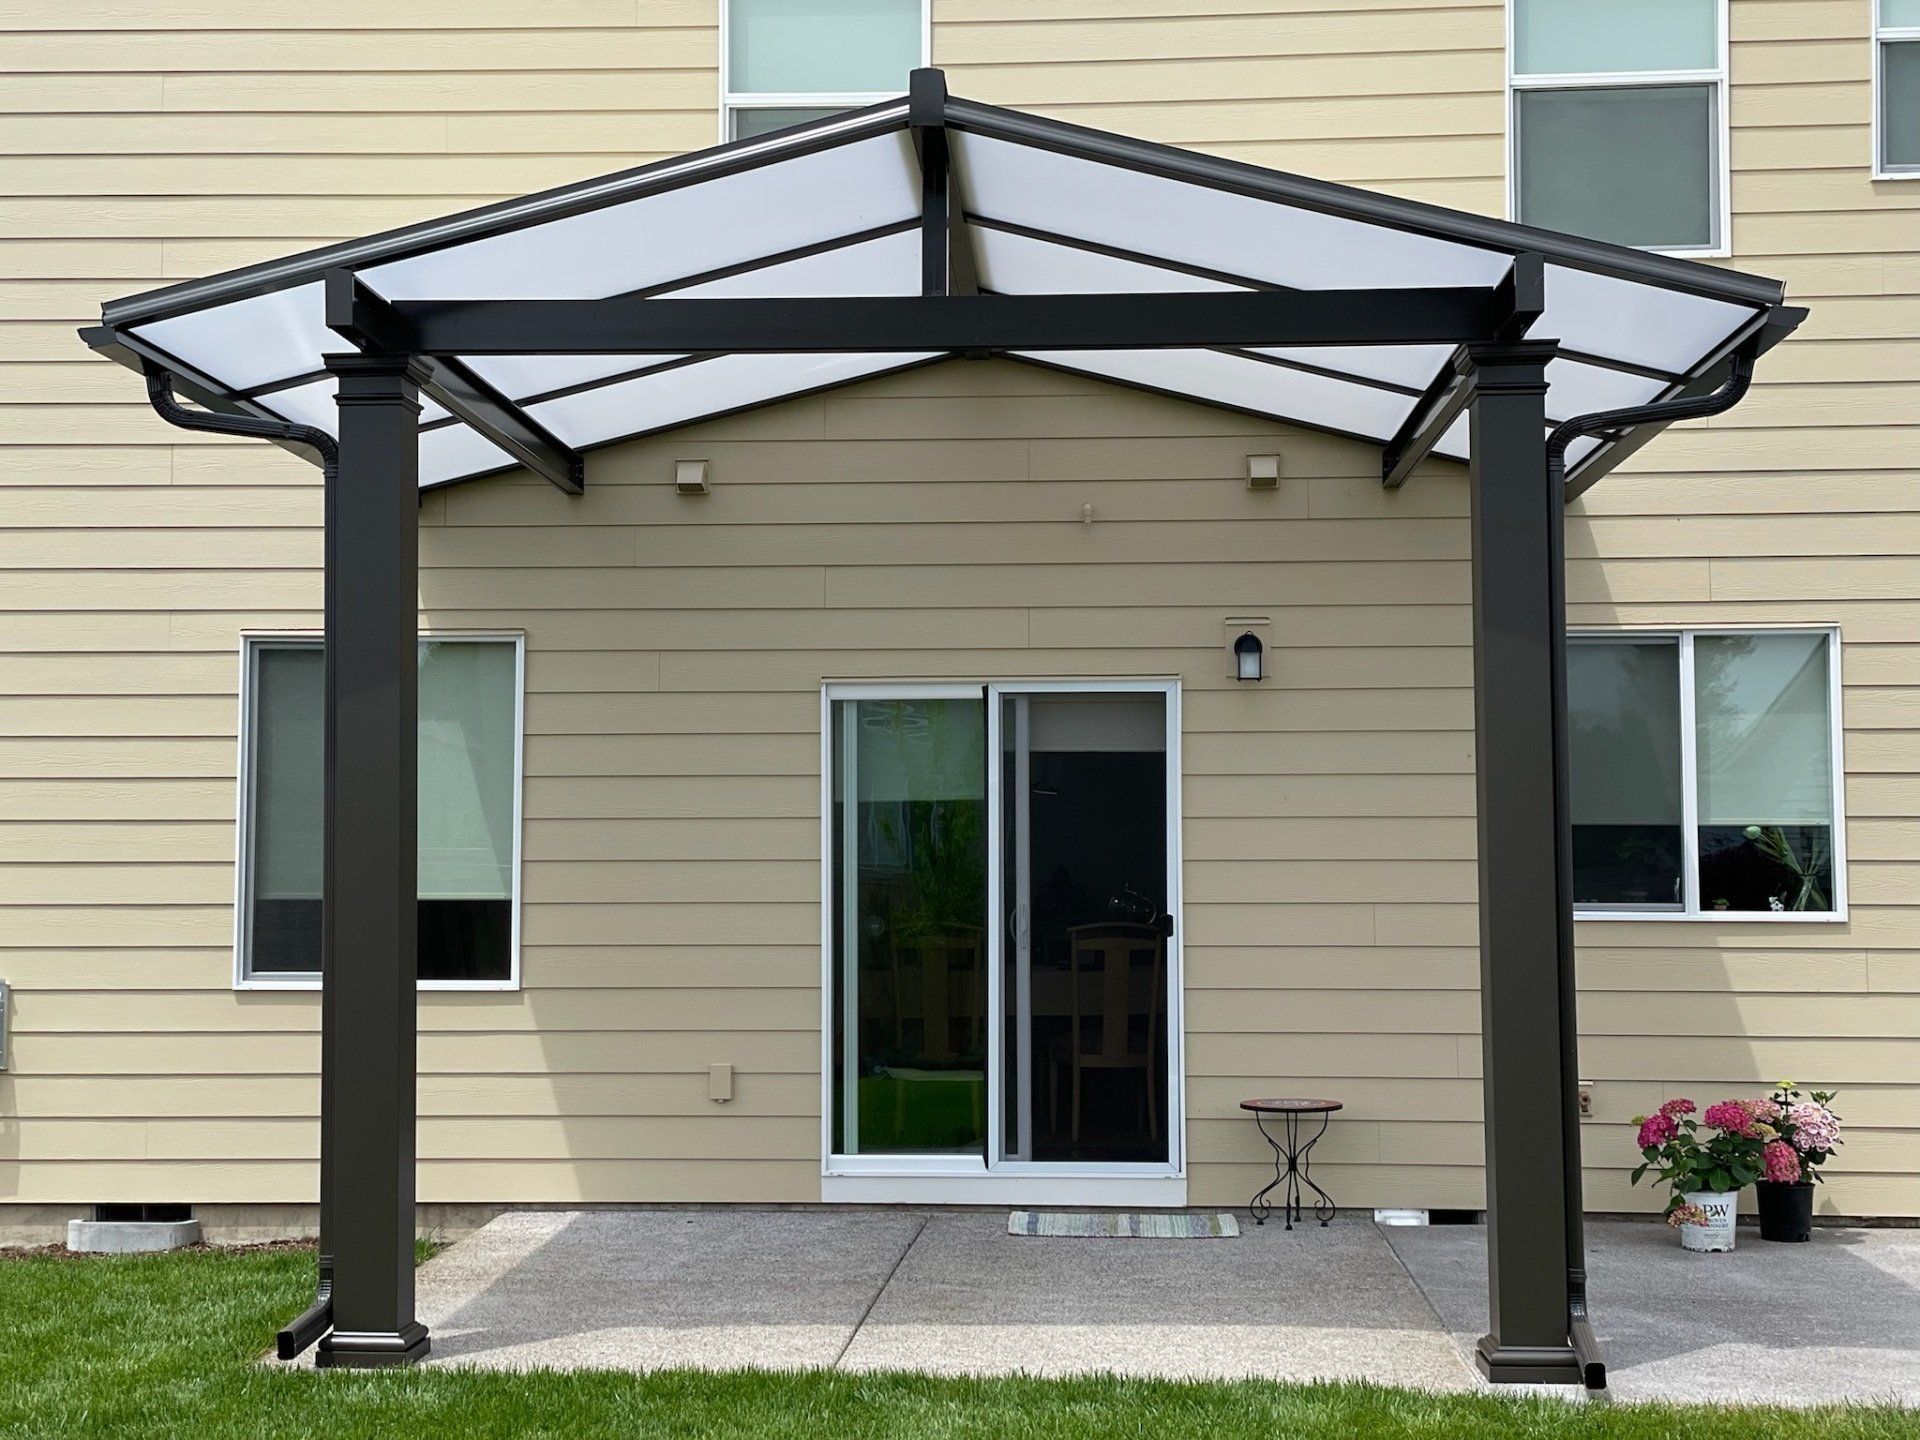 Patio Cover Contractor in West Linn - Crown Patio Covers Process